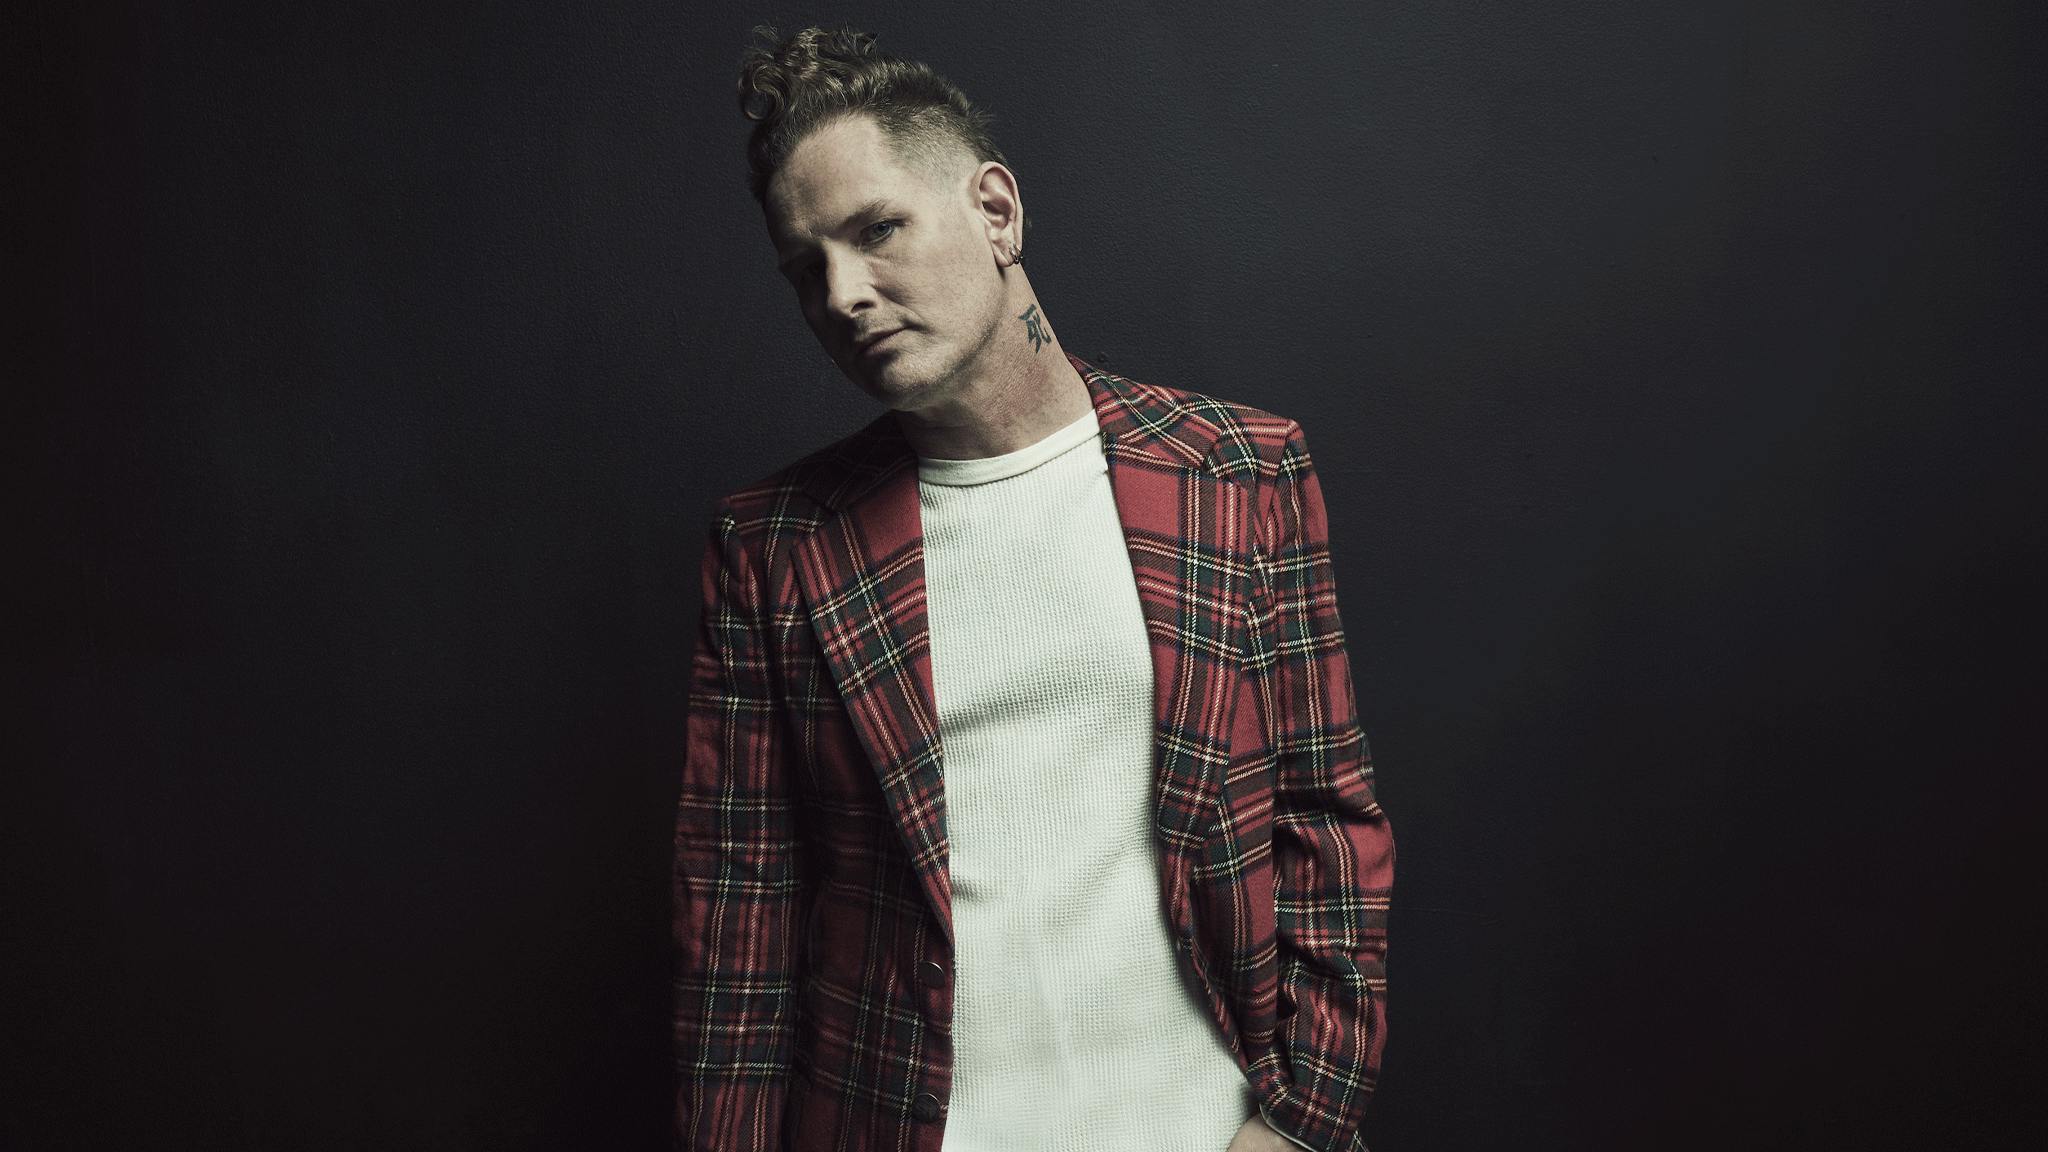 Come to an exclusive playback of Corey Taylor’s new solo album, CMF2